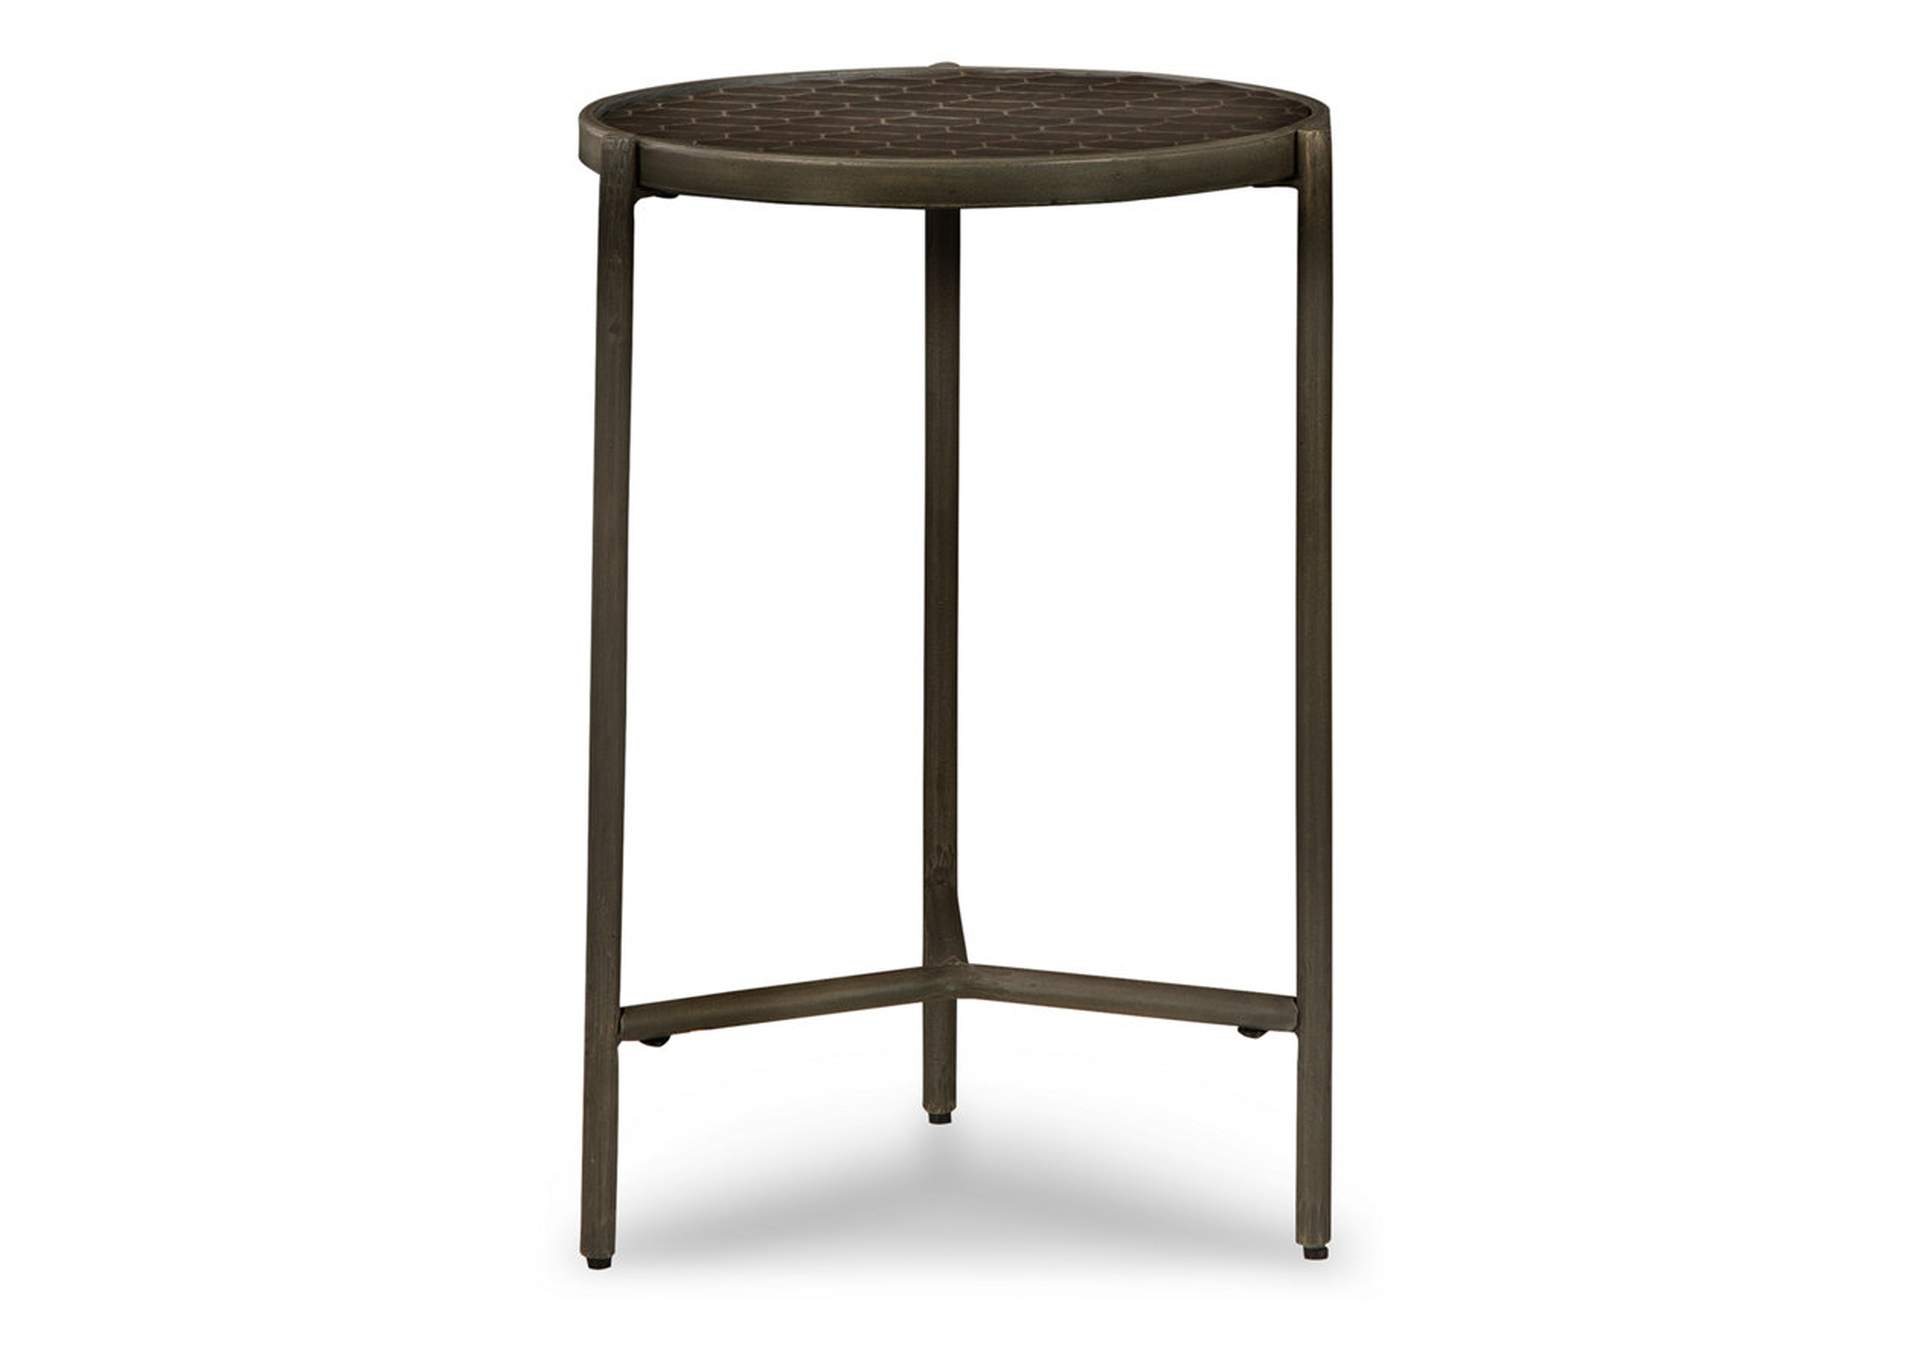 Doraley Chairside End Table,Signature Design By Ashley